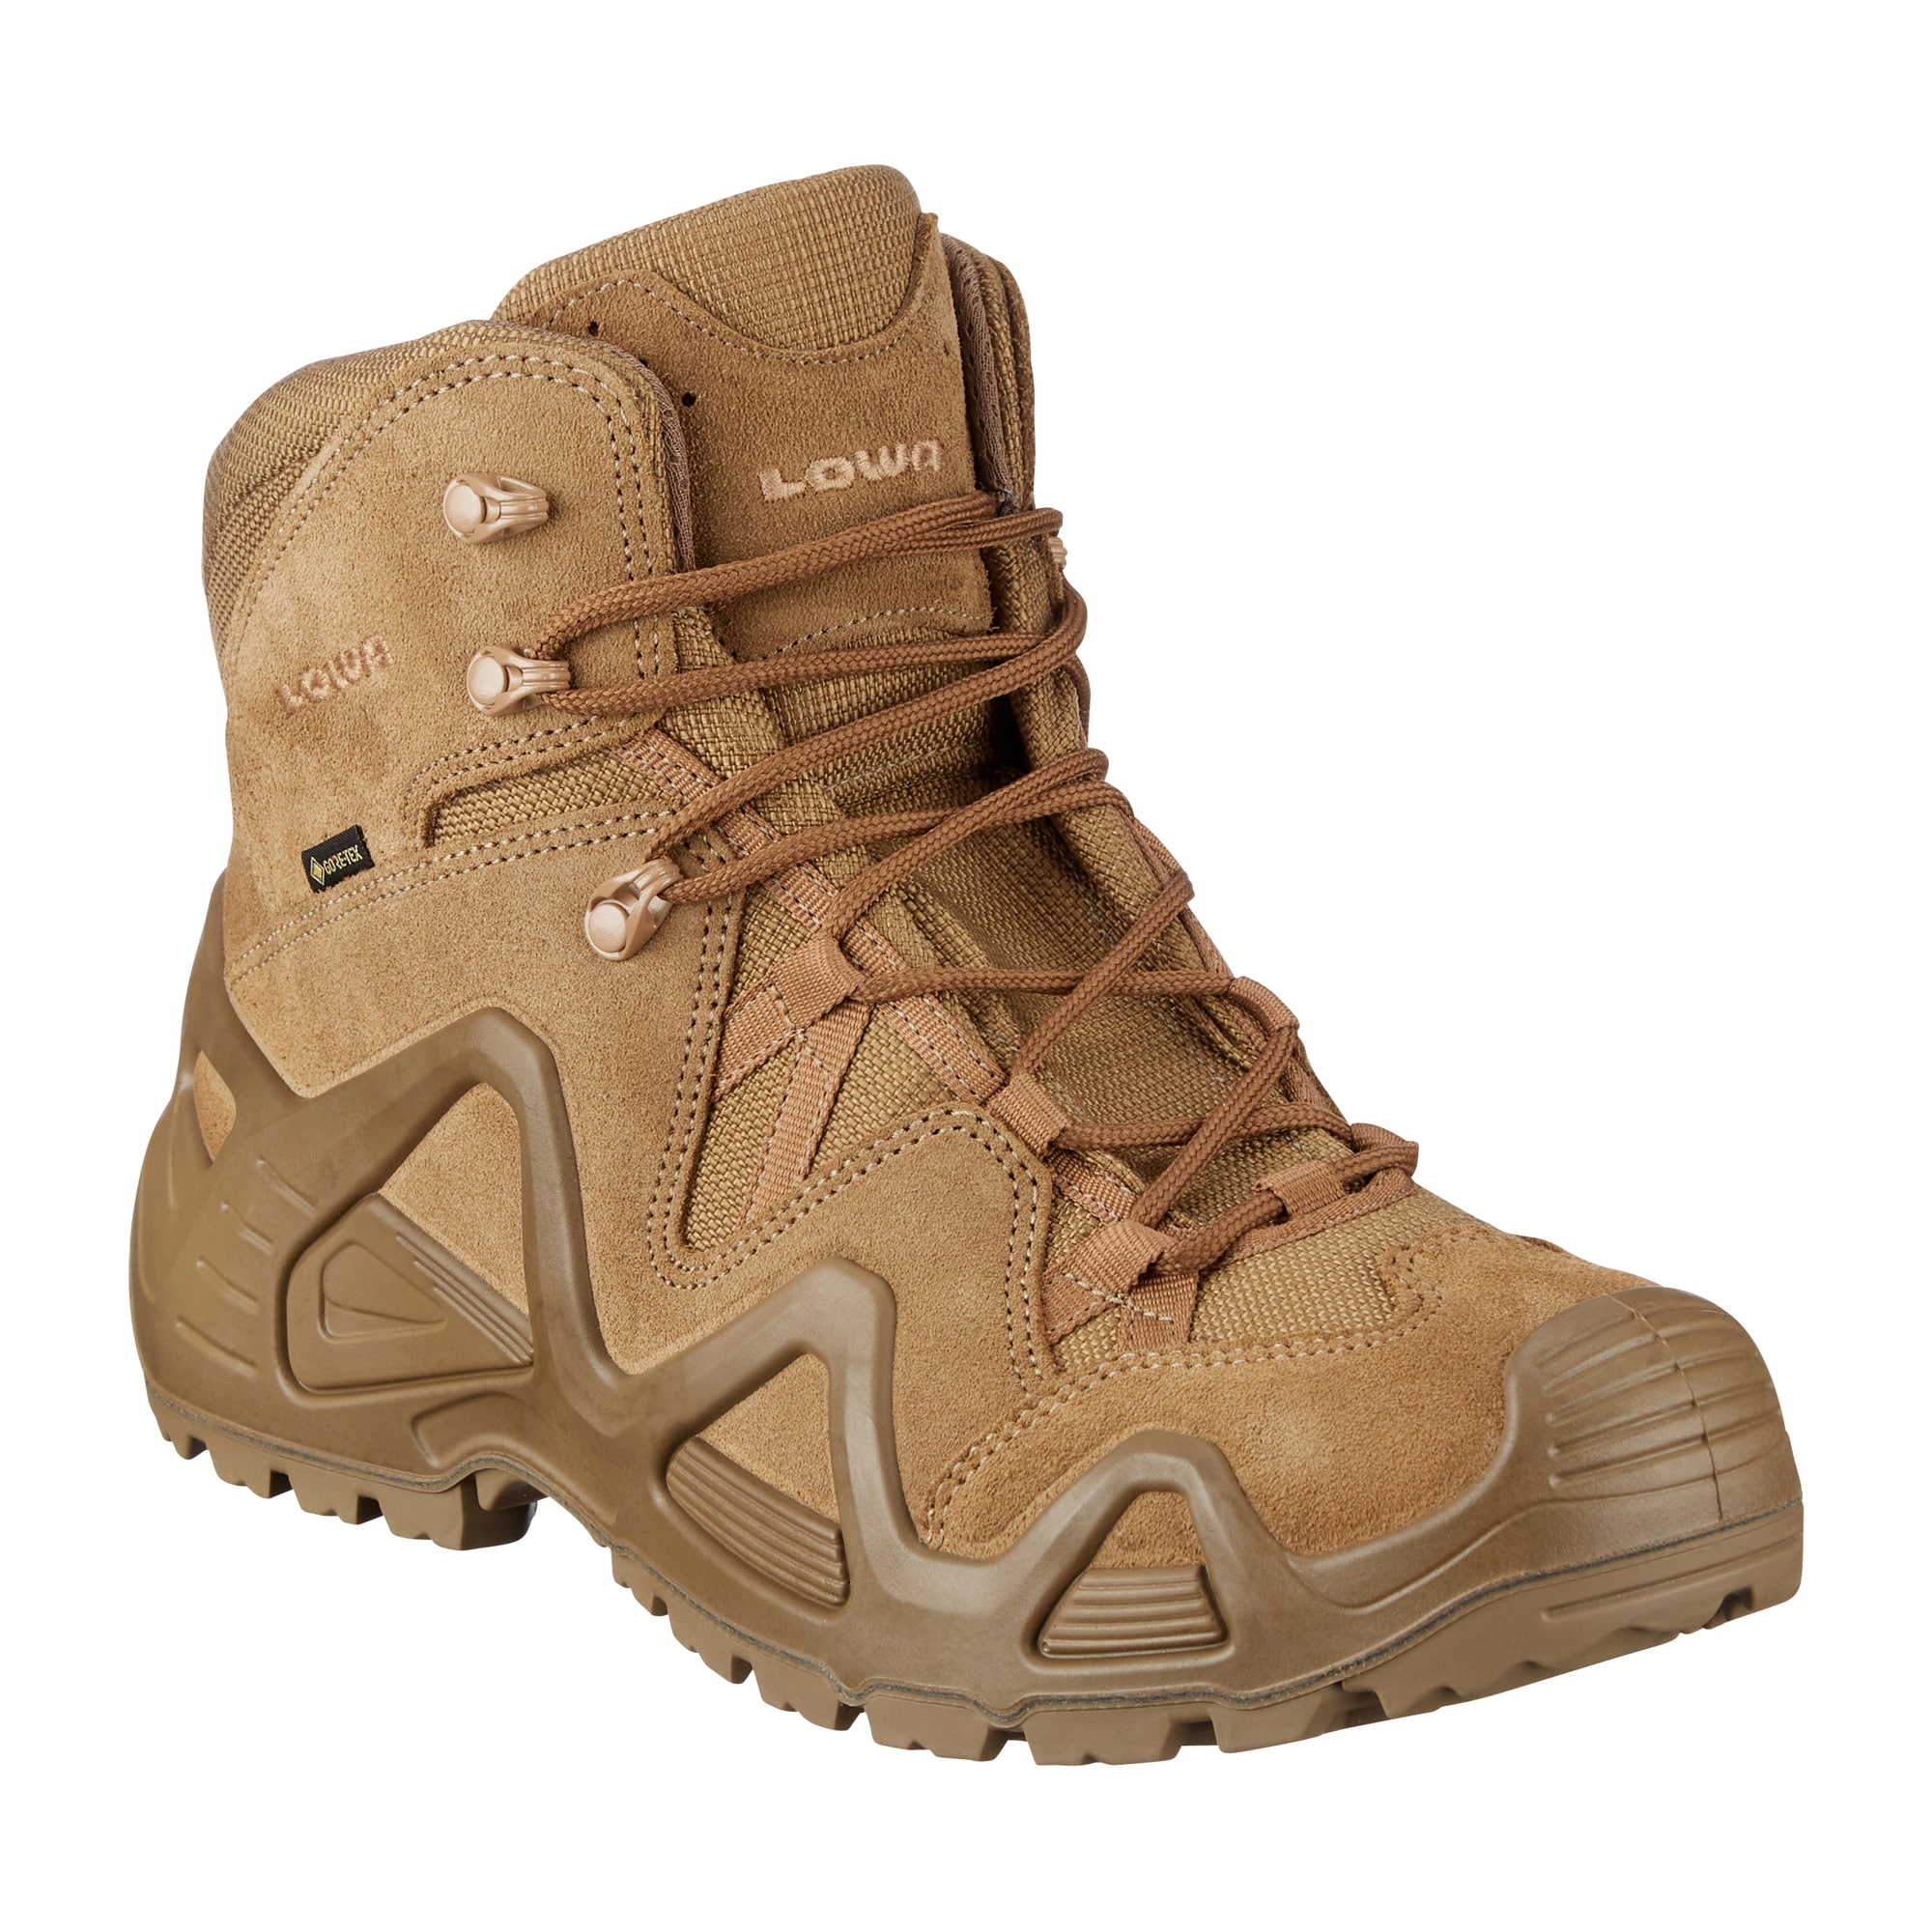 Purchase the LOWA Boots Zephyr GTX Mid TF coyote OP by ASMC